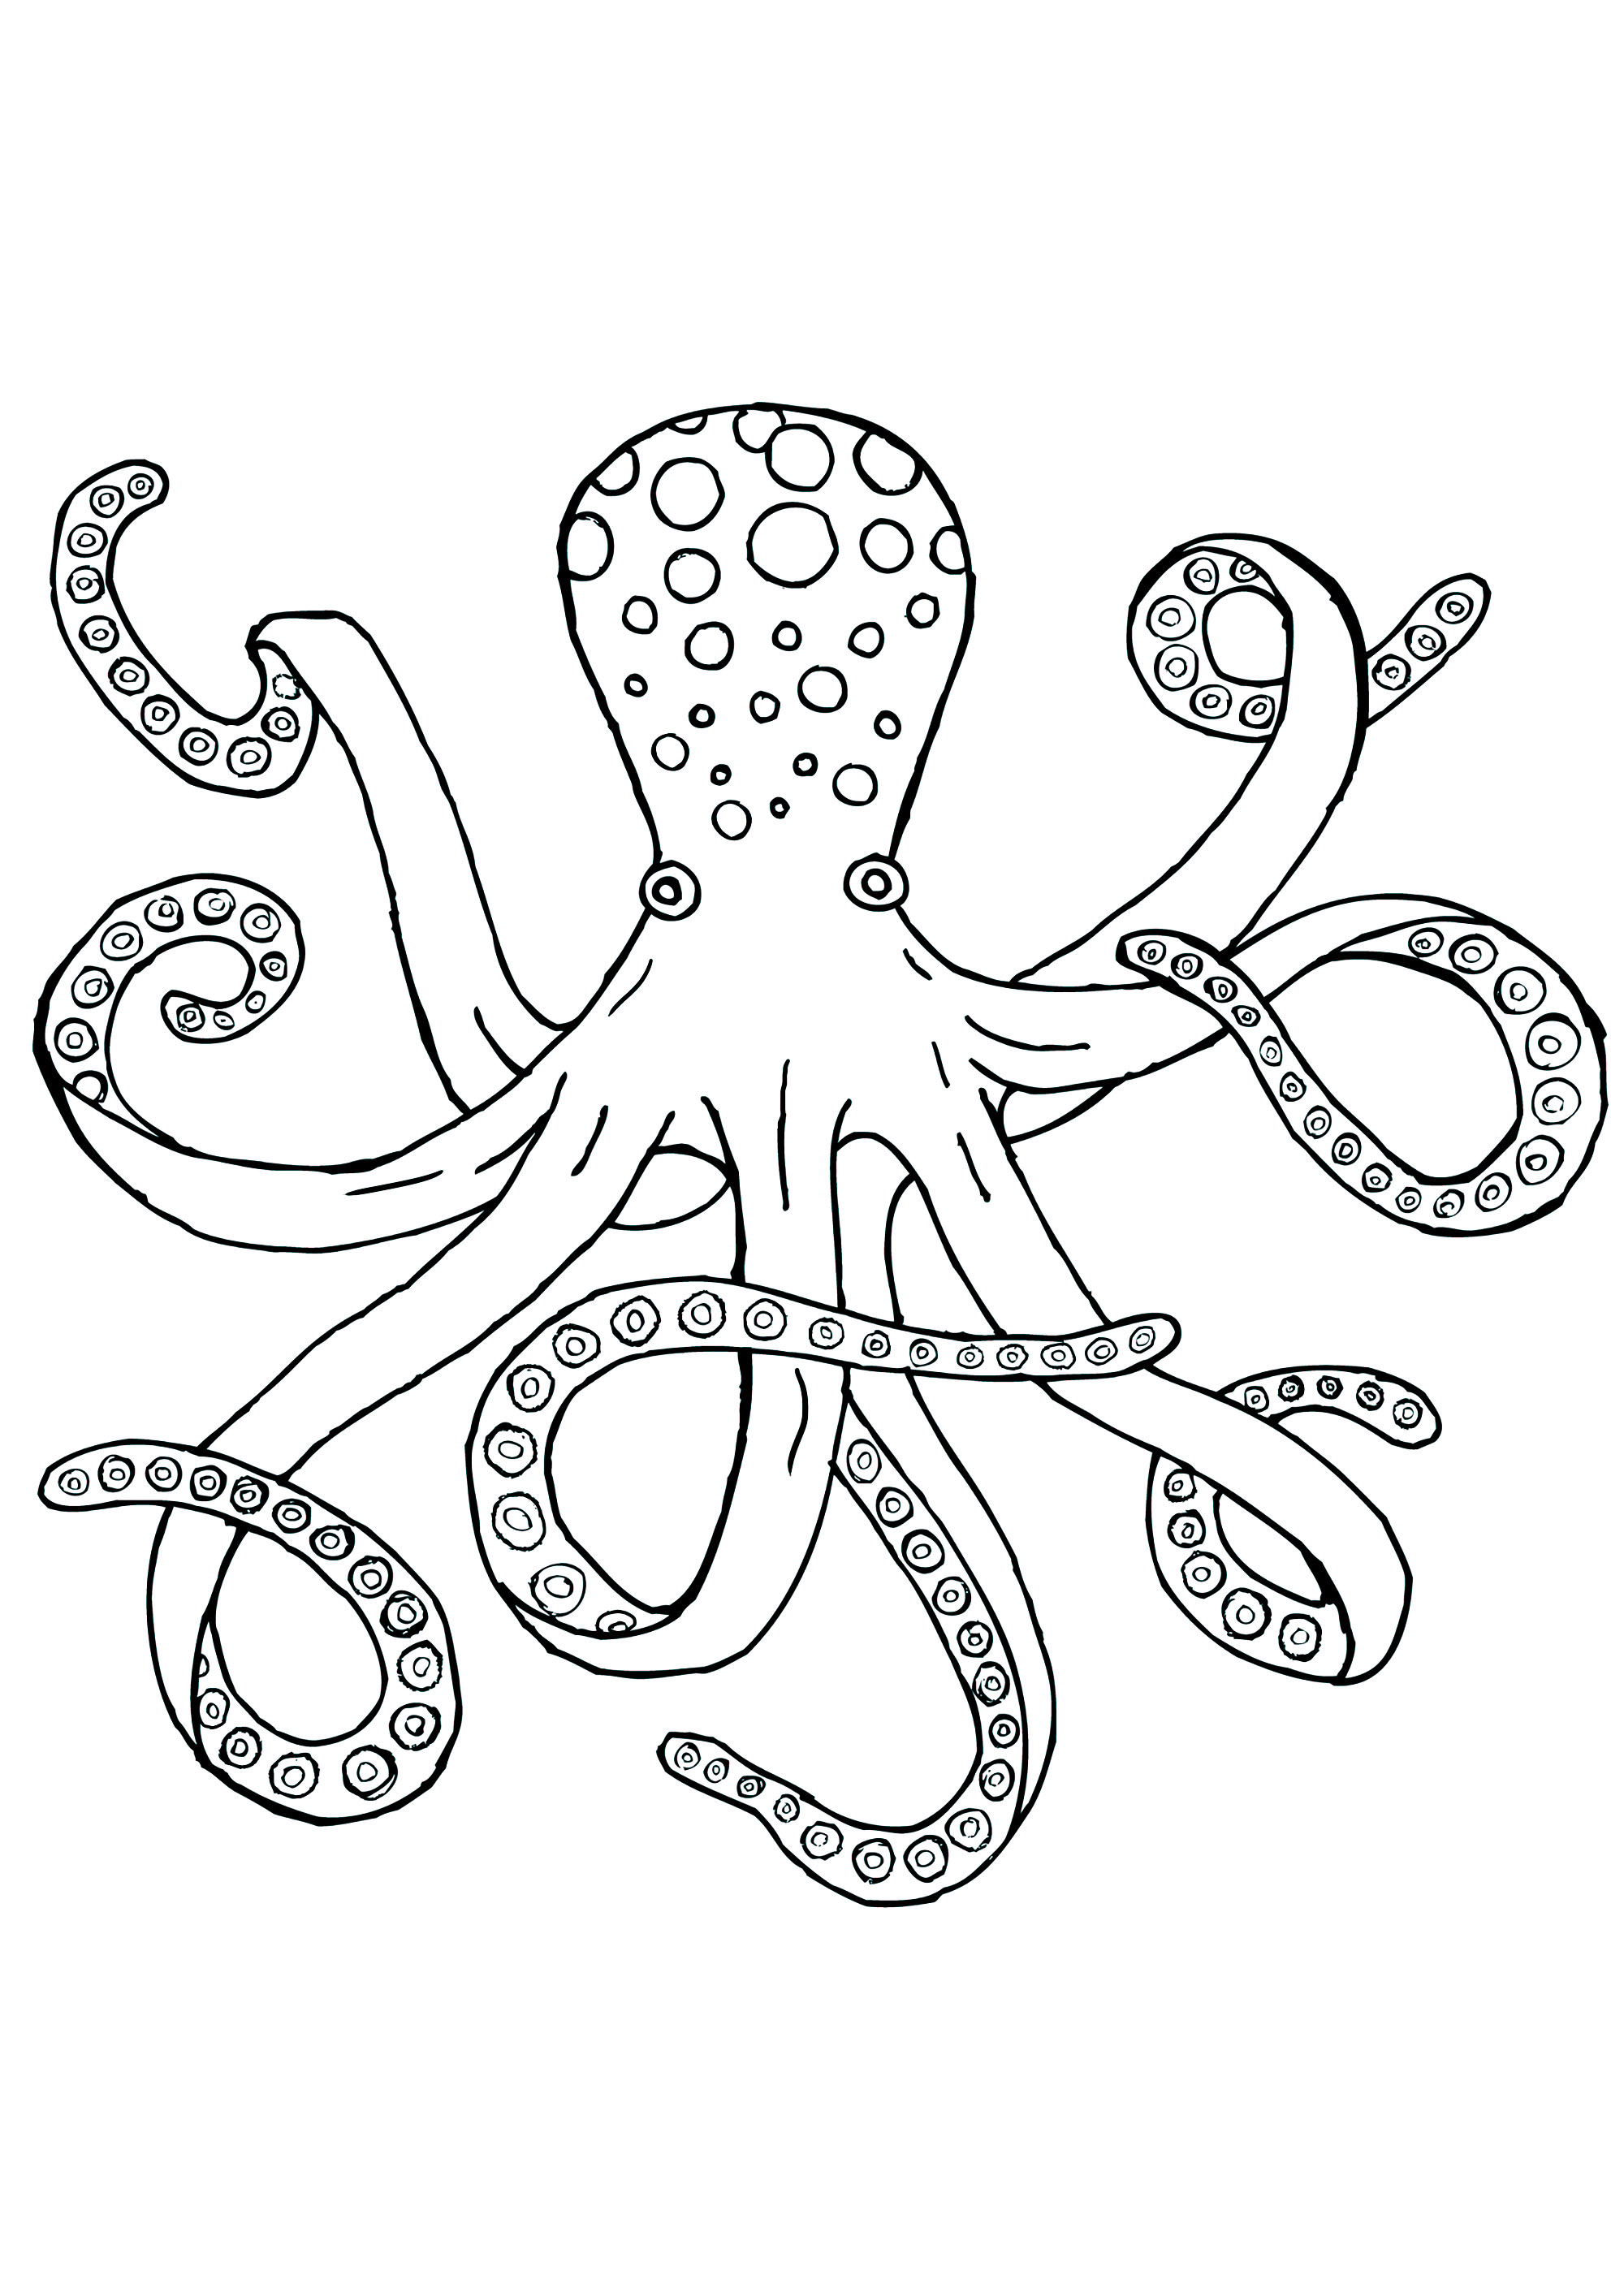 Funny Octopuses coloring page for children